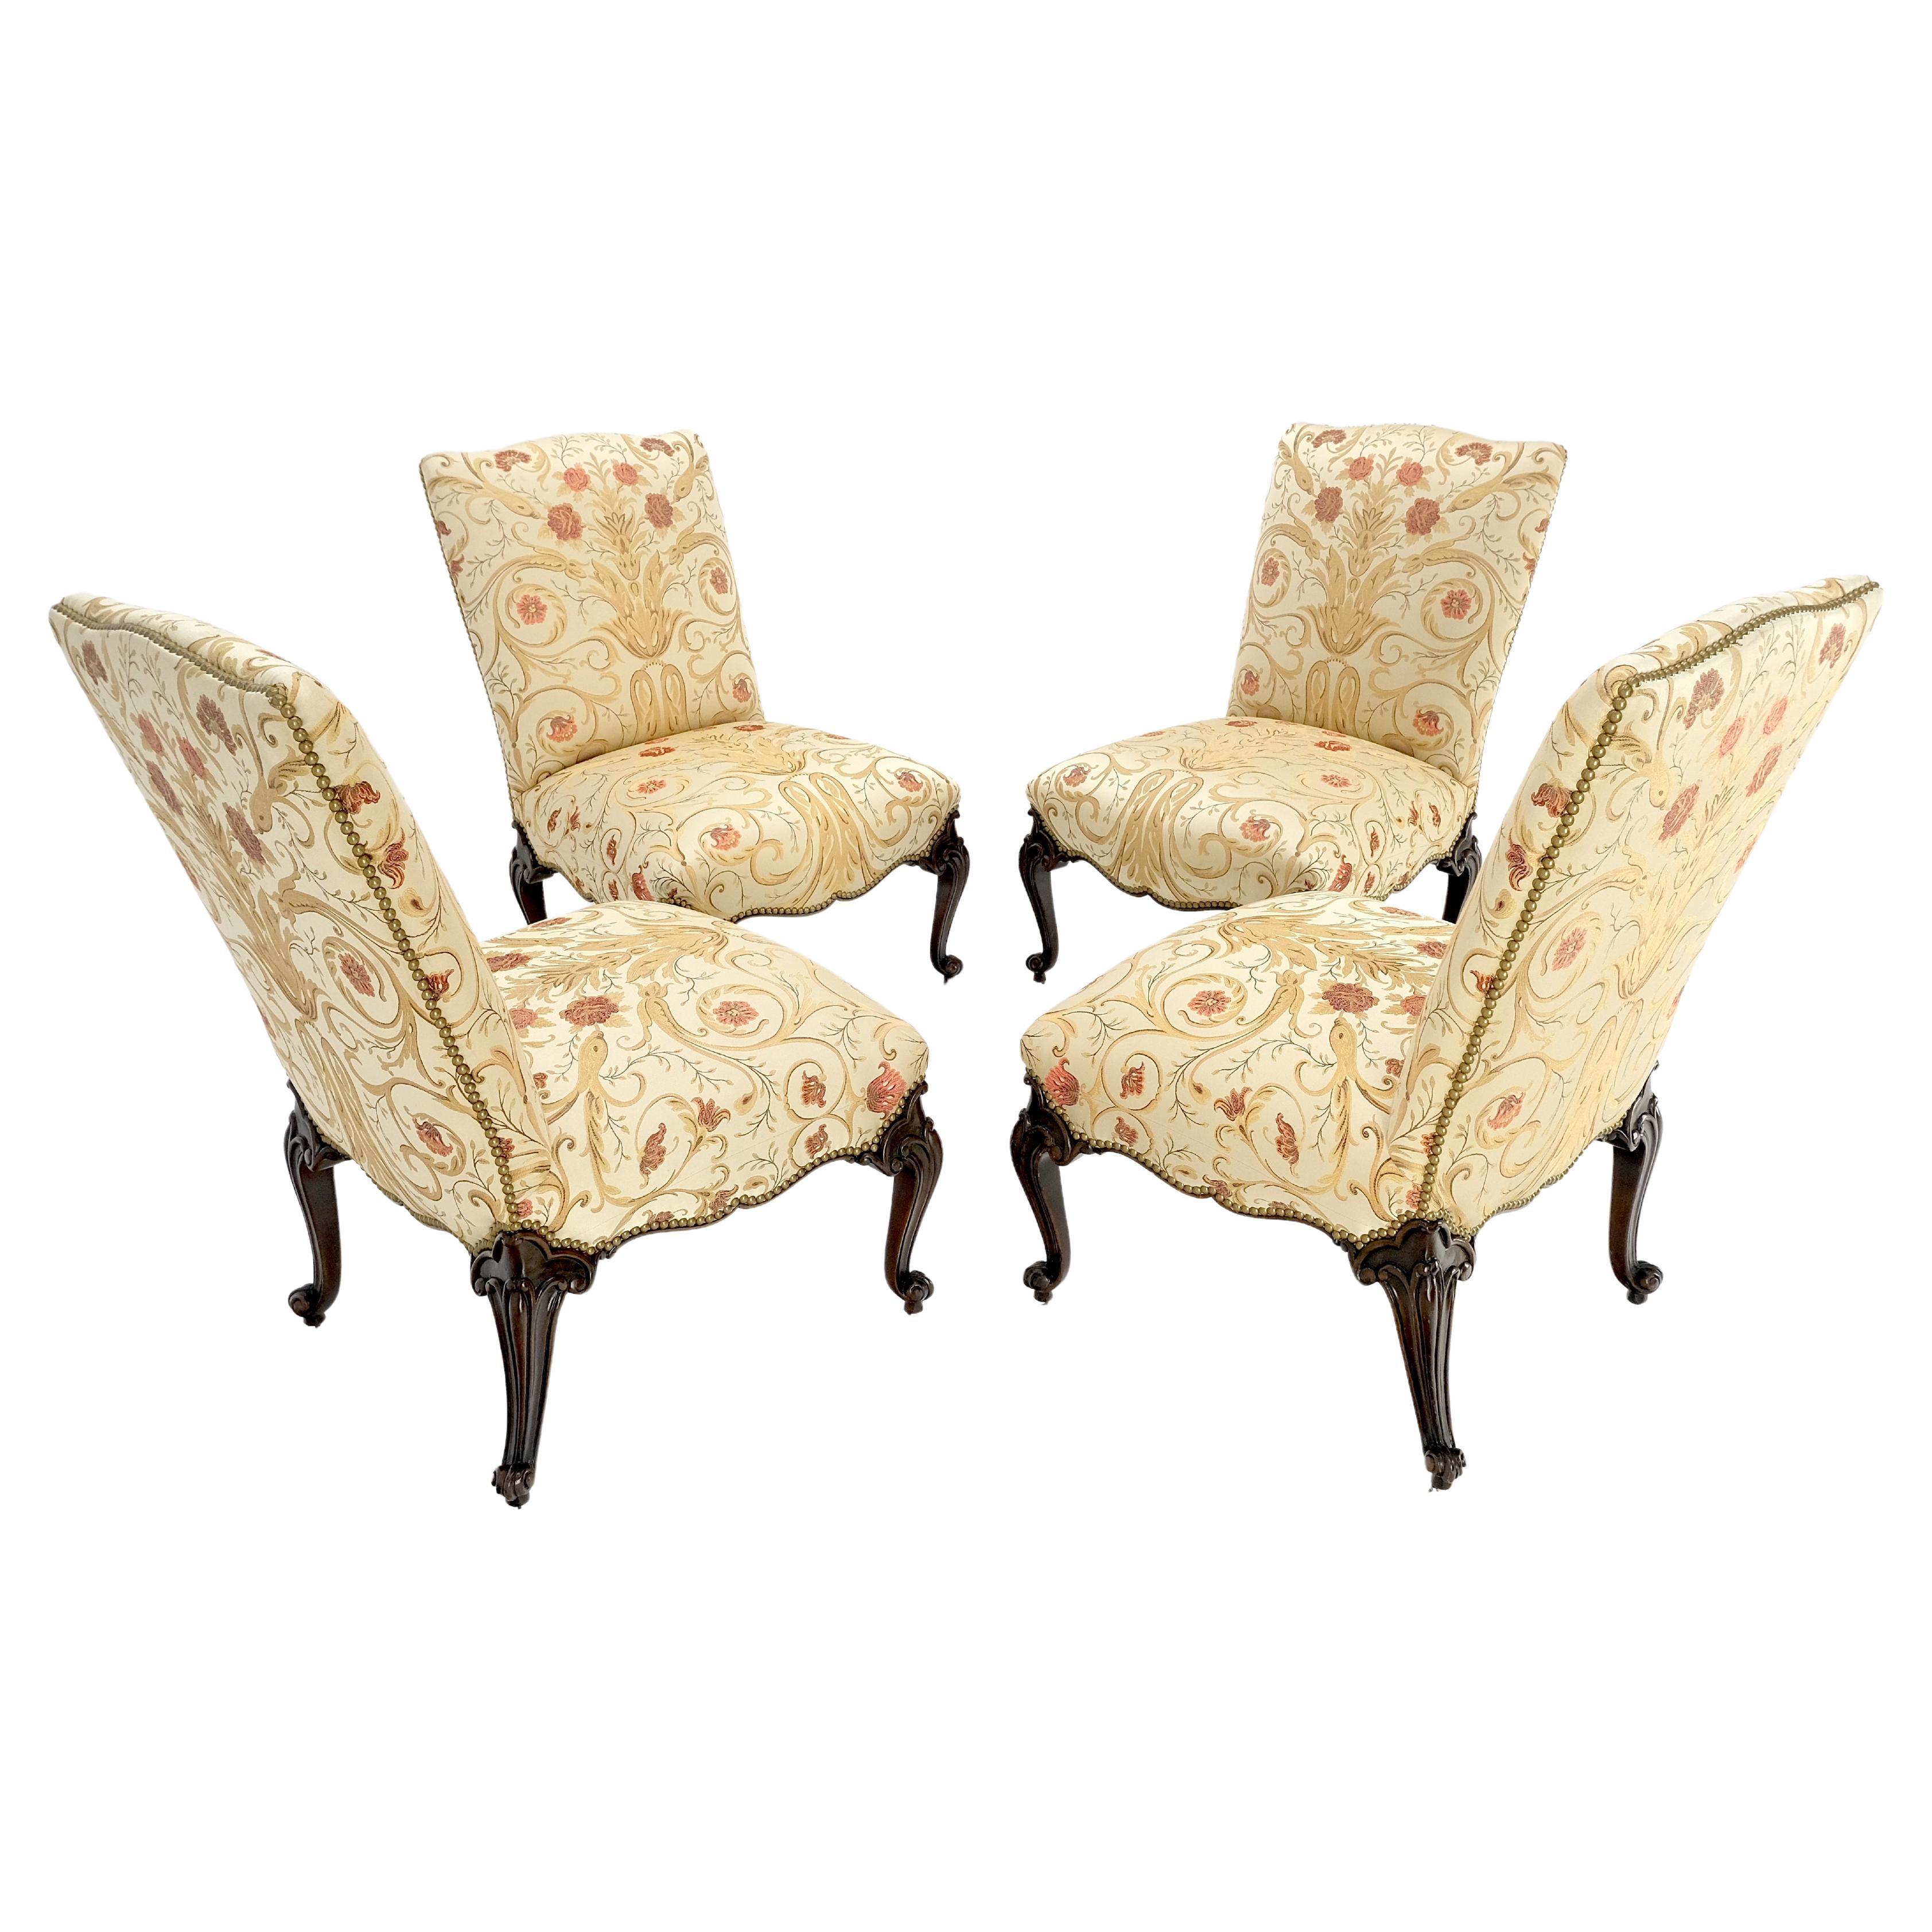 Set 4 Floral Gold & Red Upholstery Fine Carved Legs Slipper Lounge Chairs MINT! For Sale